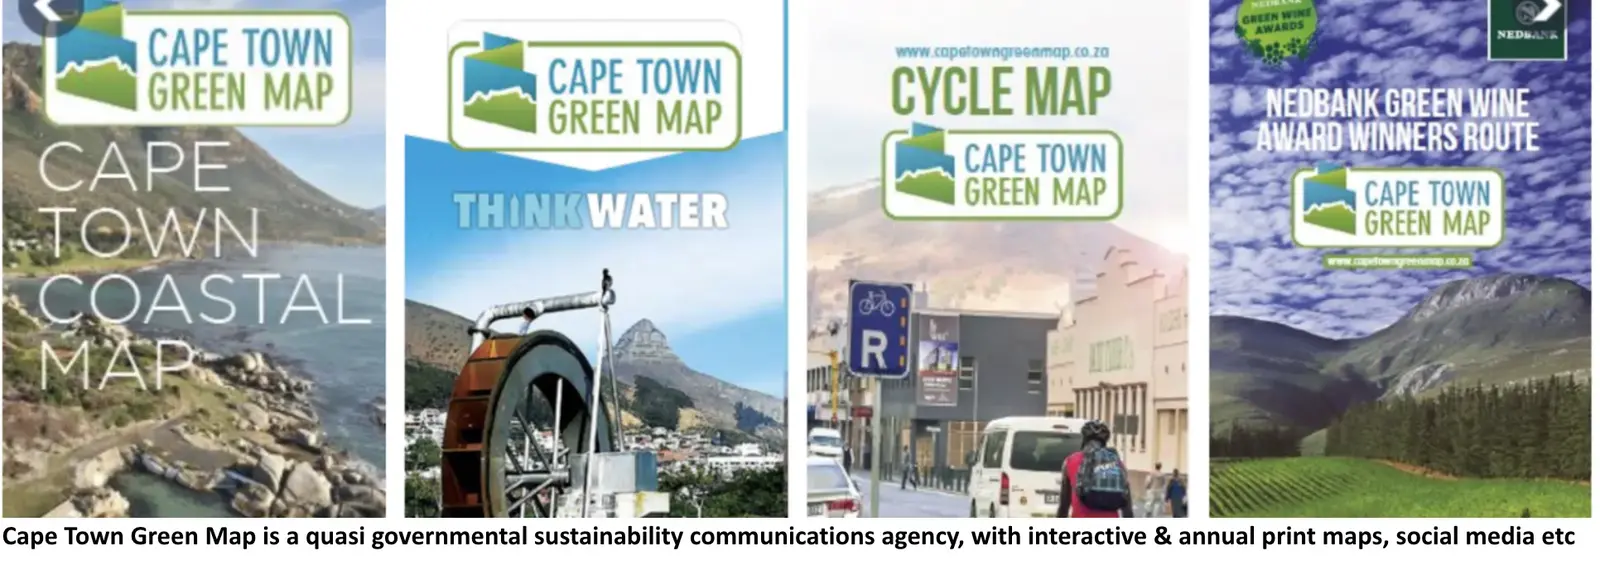 Recent editions of the awesome Cape Town Green Map